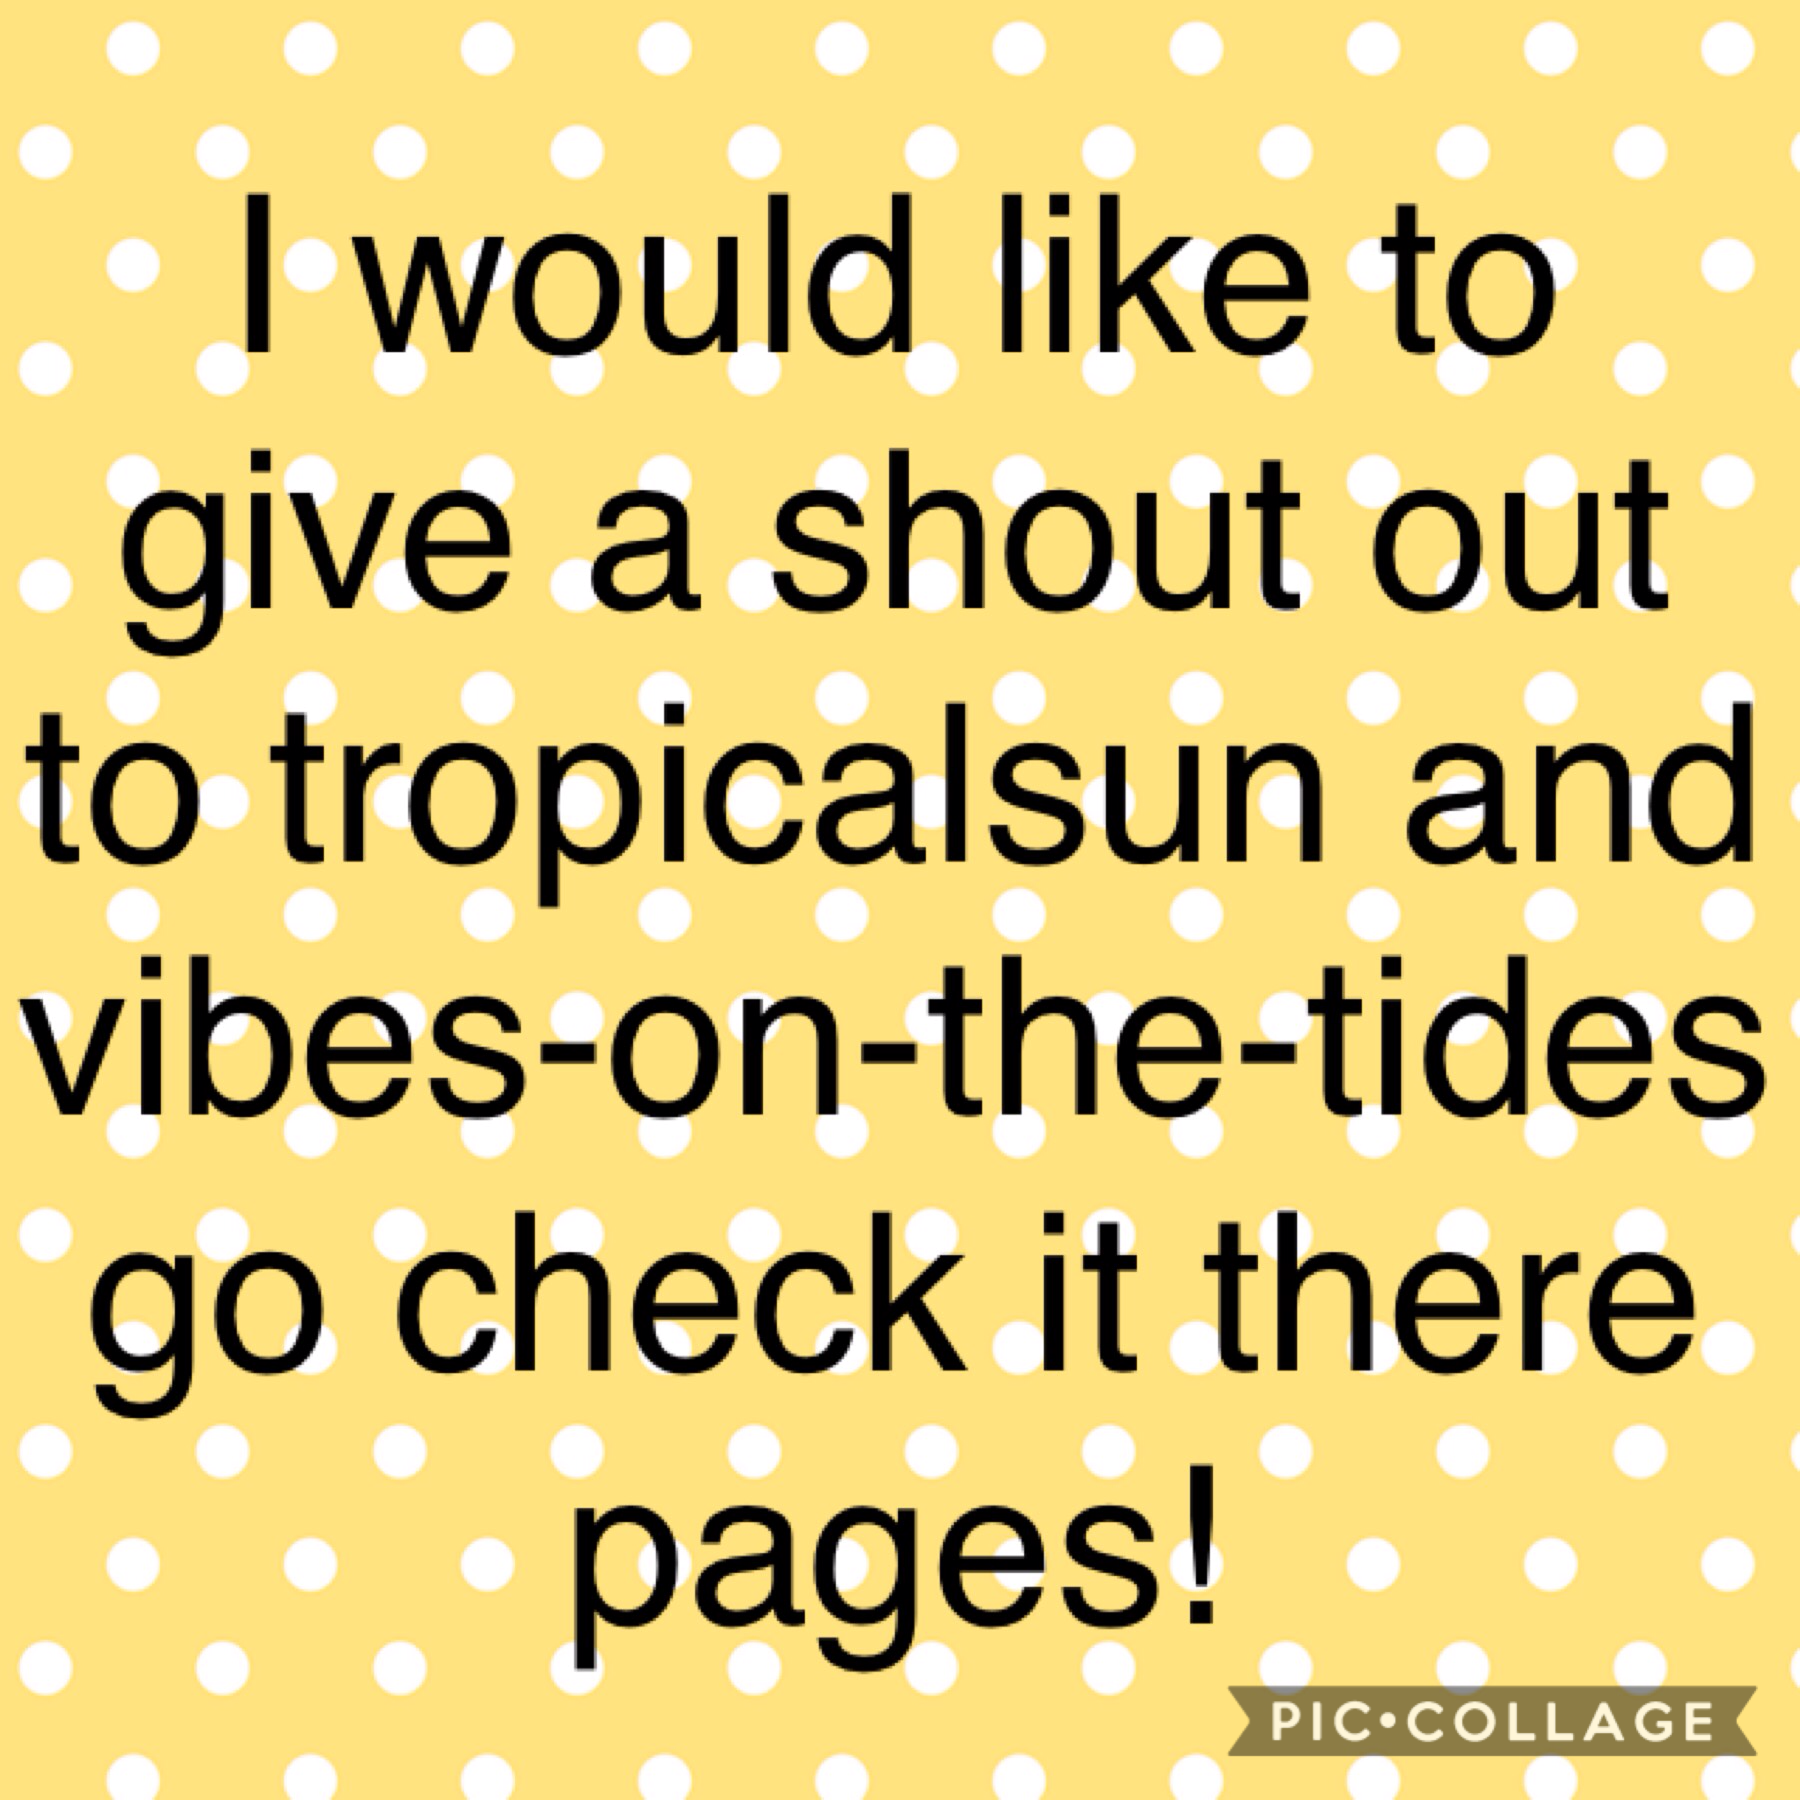 Go check out tropicalsun's page and also vibes on the tides